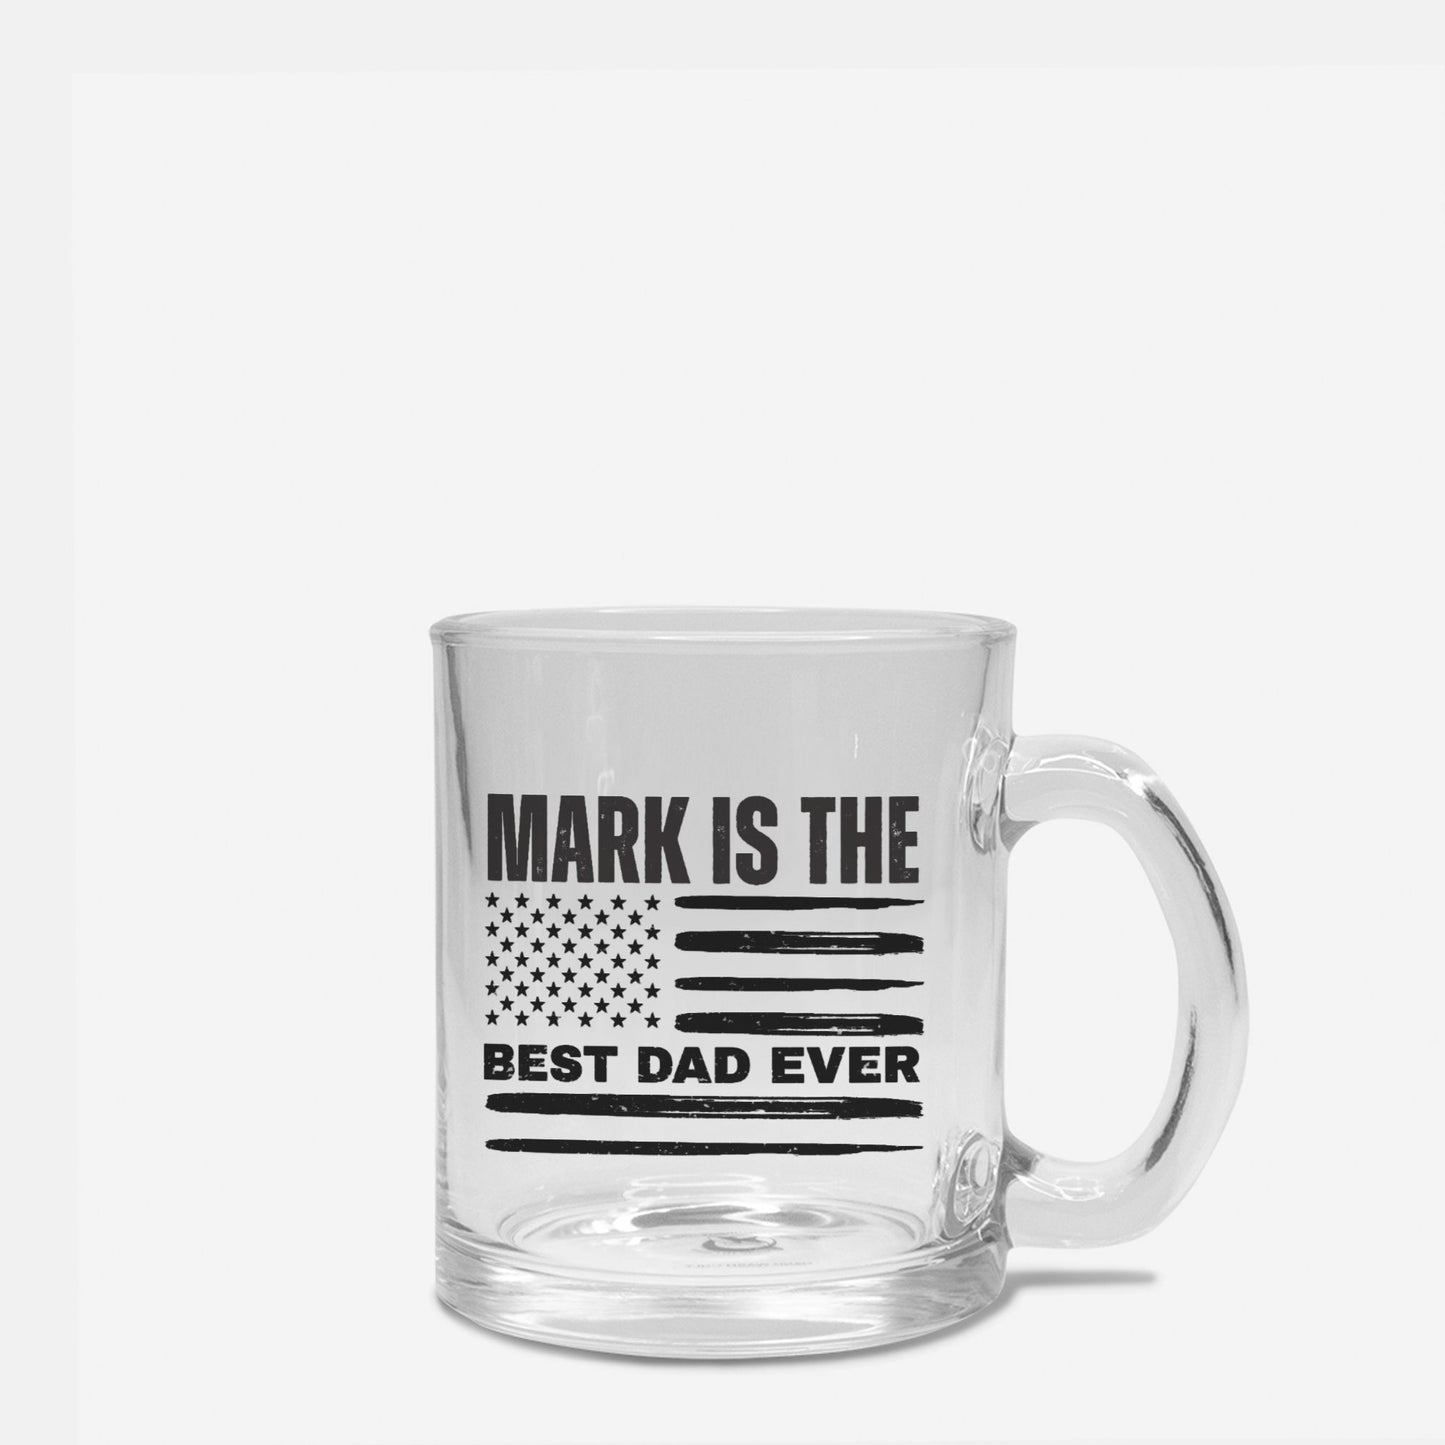 Is The Best Dad Ever Personalized Mug Glass